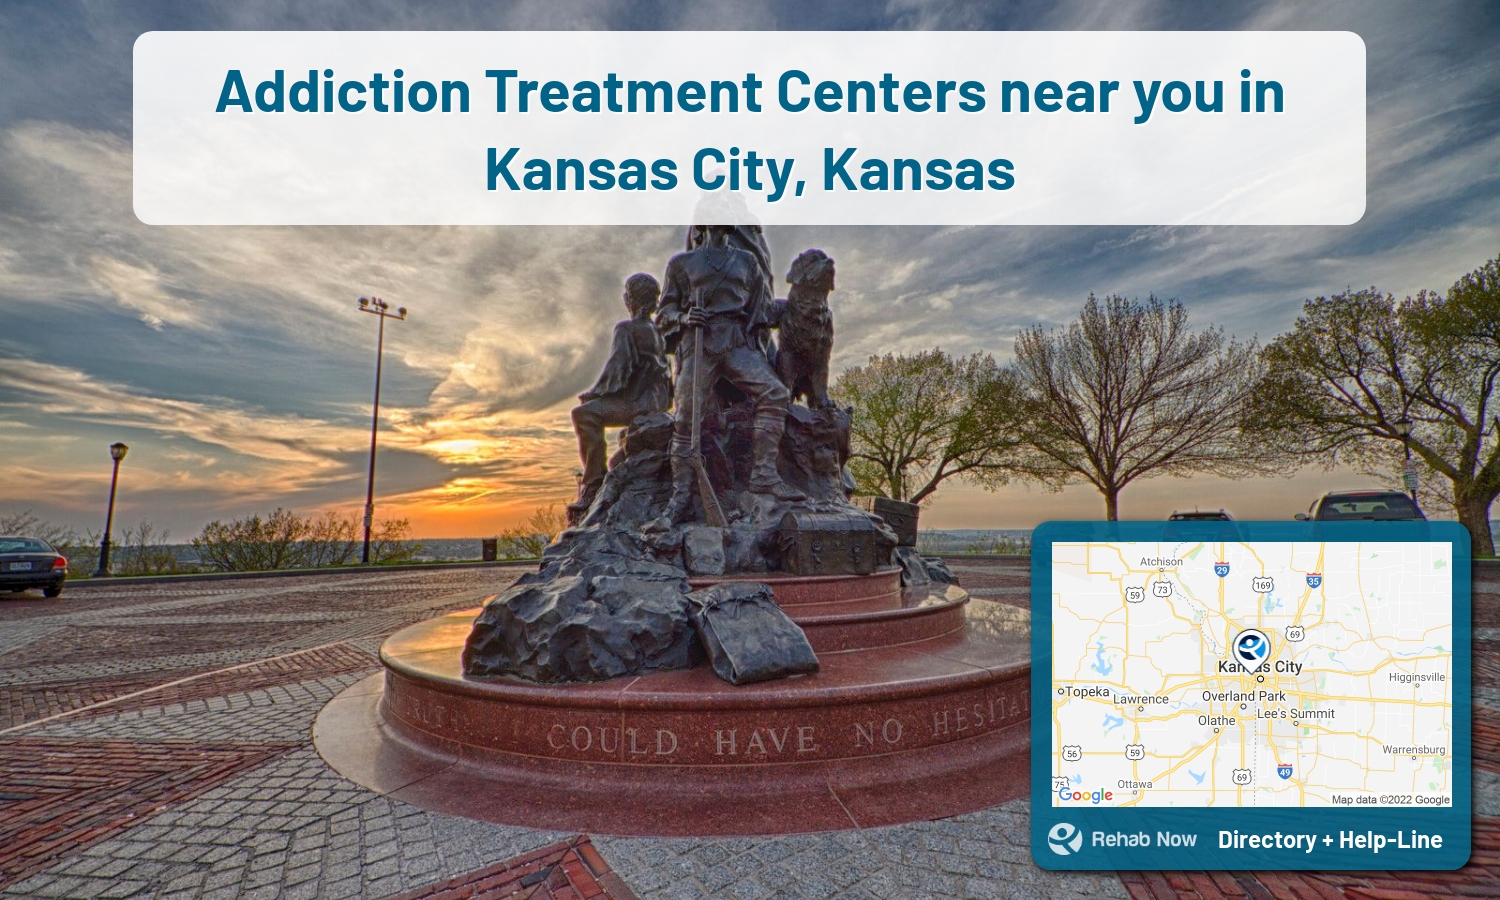 Kansas City, KS Treatment Centers. Find drug rehab in Kansas City, Kansas, or detox and treatment programs. Get the right help now!